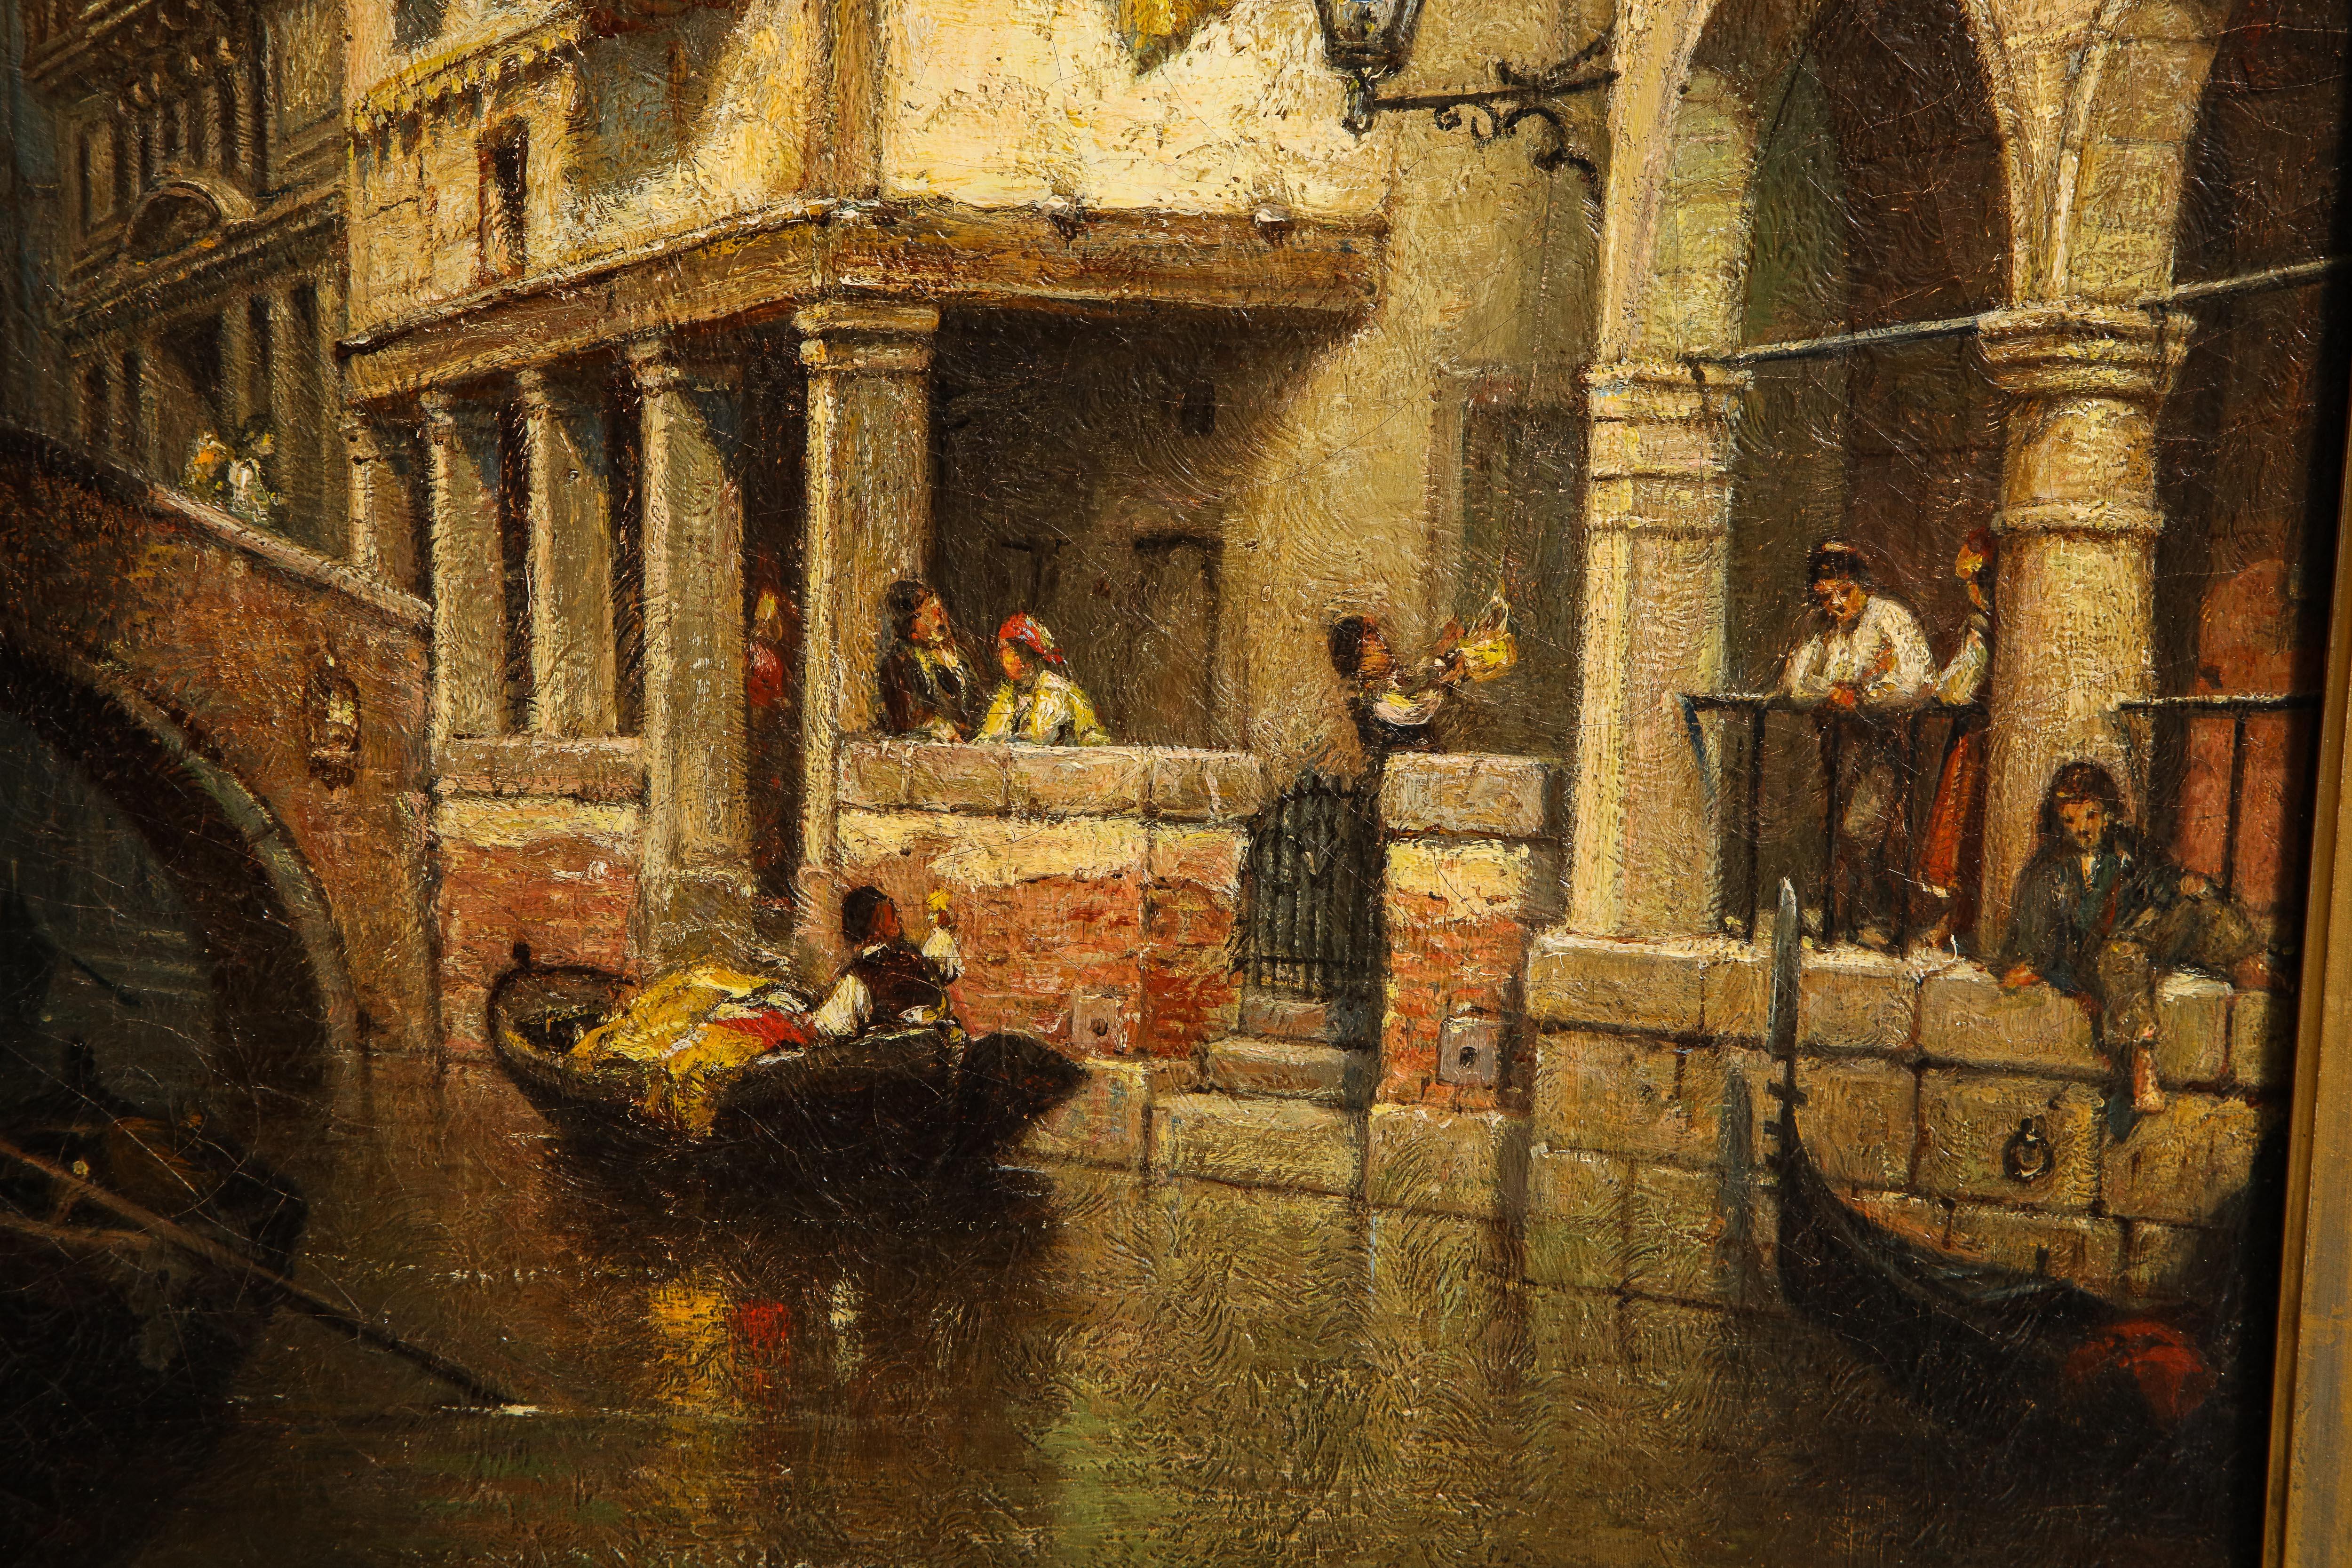 American Italian impressionist Venetian Canal, Figure w/ Canoe, Gilded Frame - Brown Figurative Painting by Andrew bunner